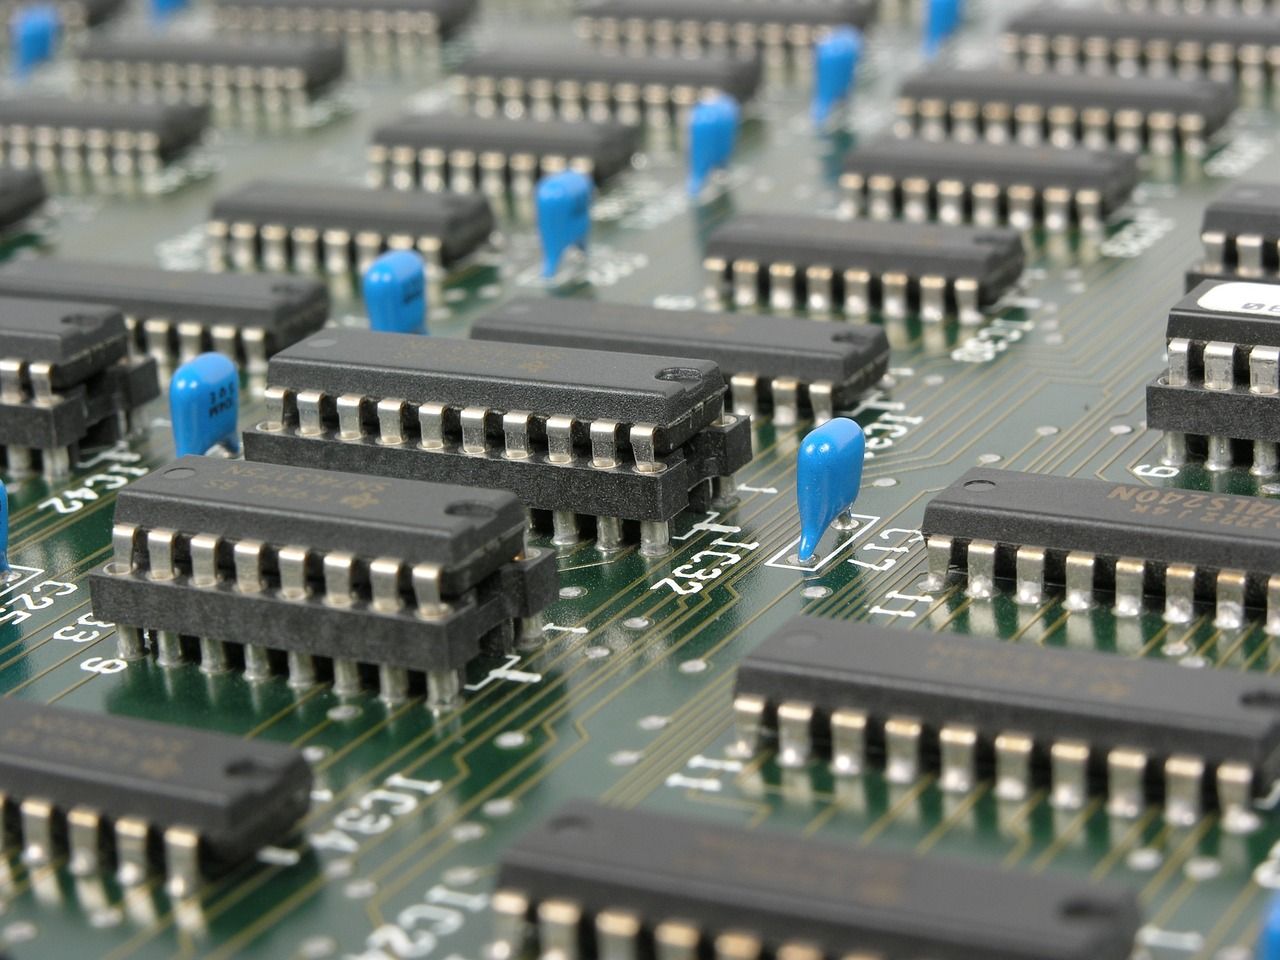 Decorative symbol photo shows electronic circuits of a motherboard.